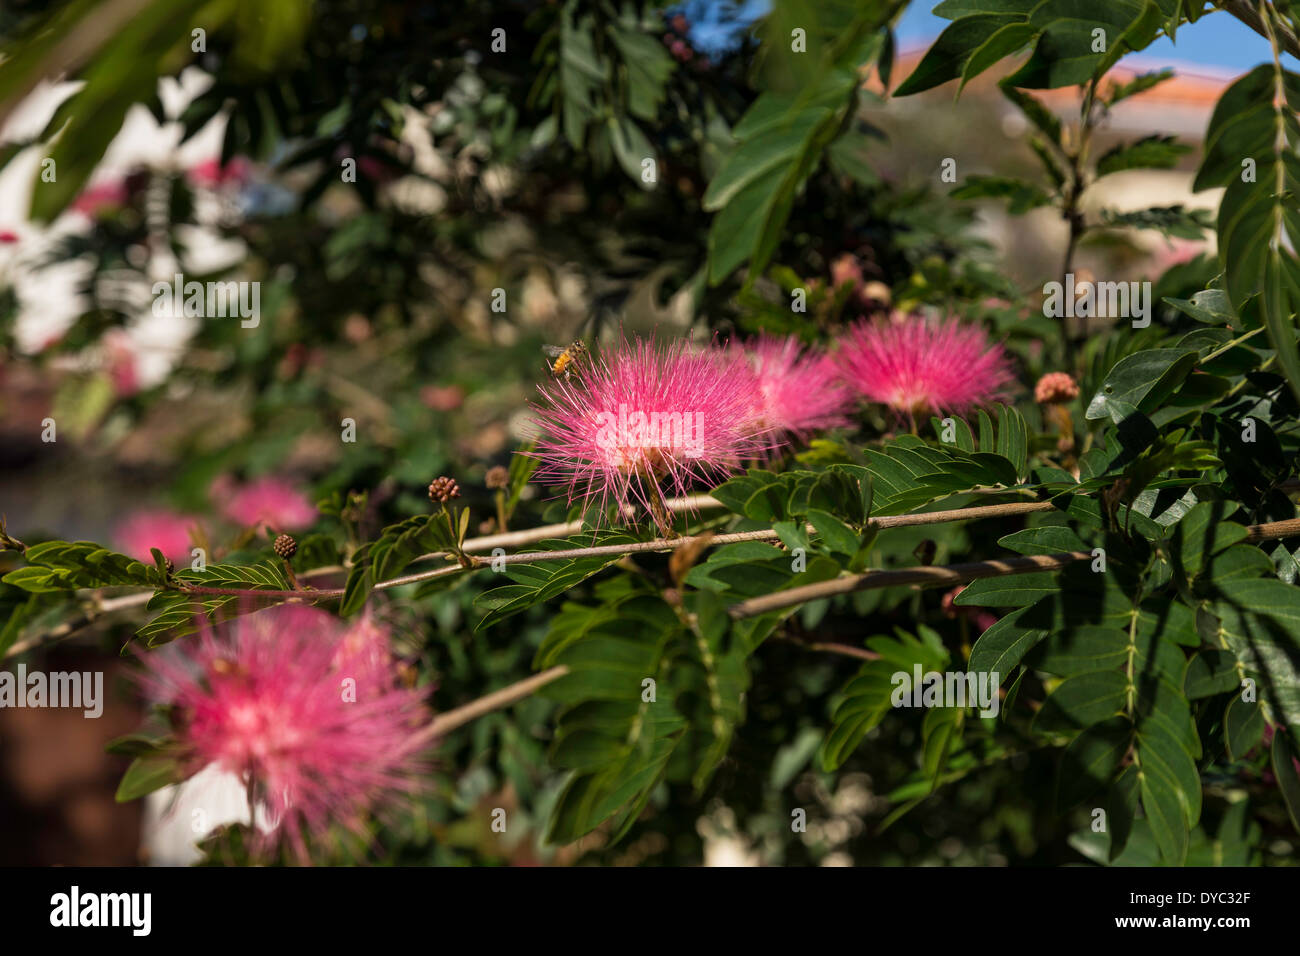 Blooming Formosa Tree in Florida, USA Stock Photo